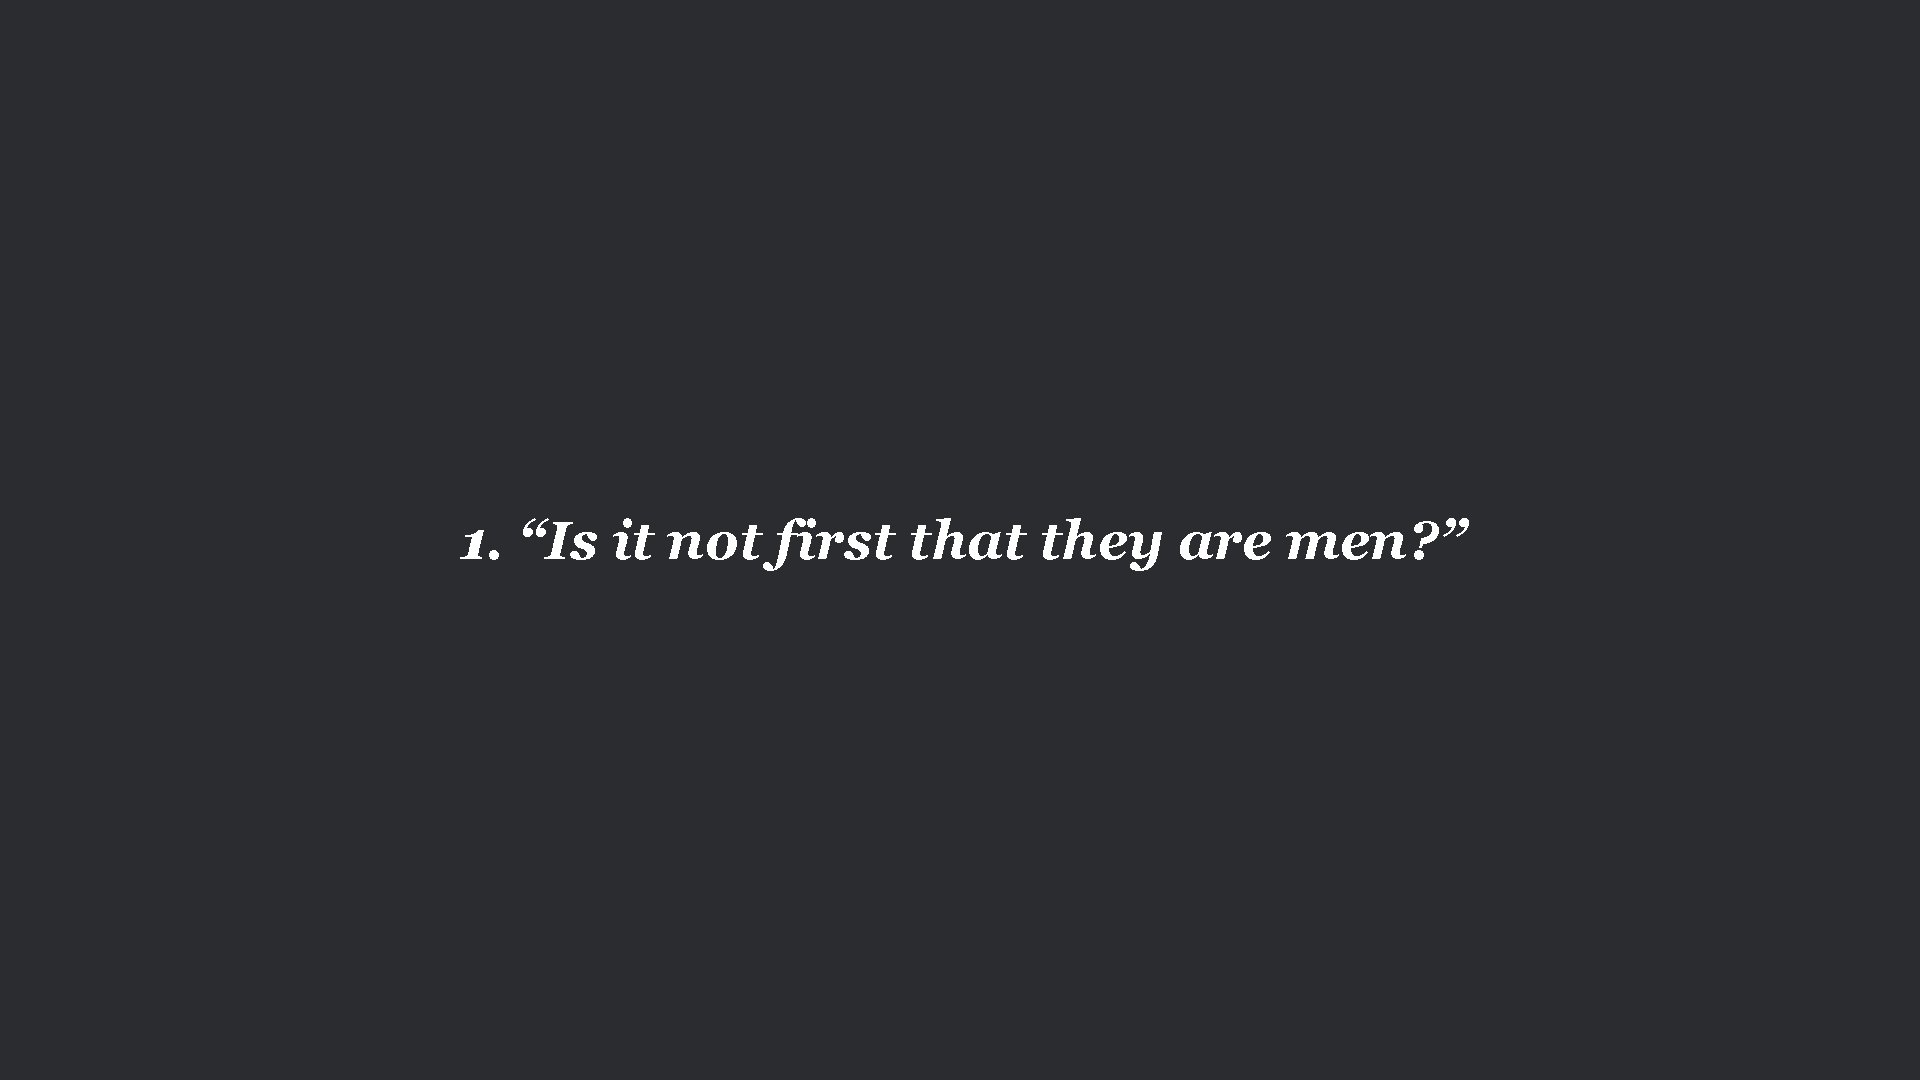 1. “Is it not first that they are men? ” 